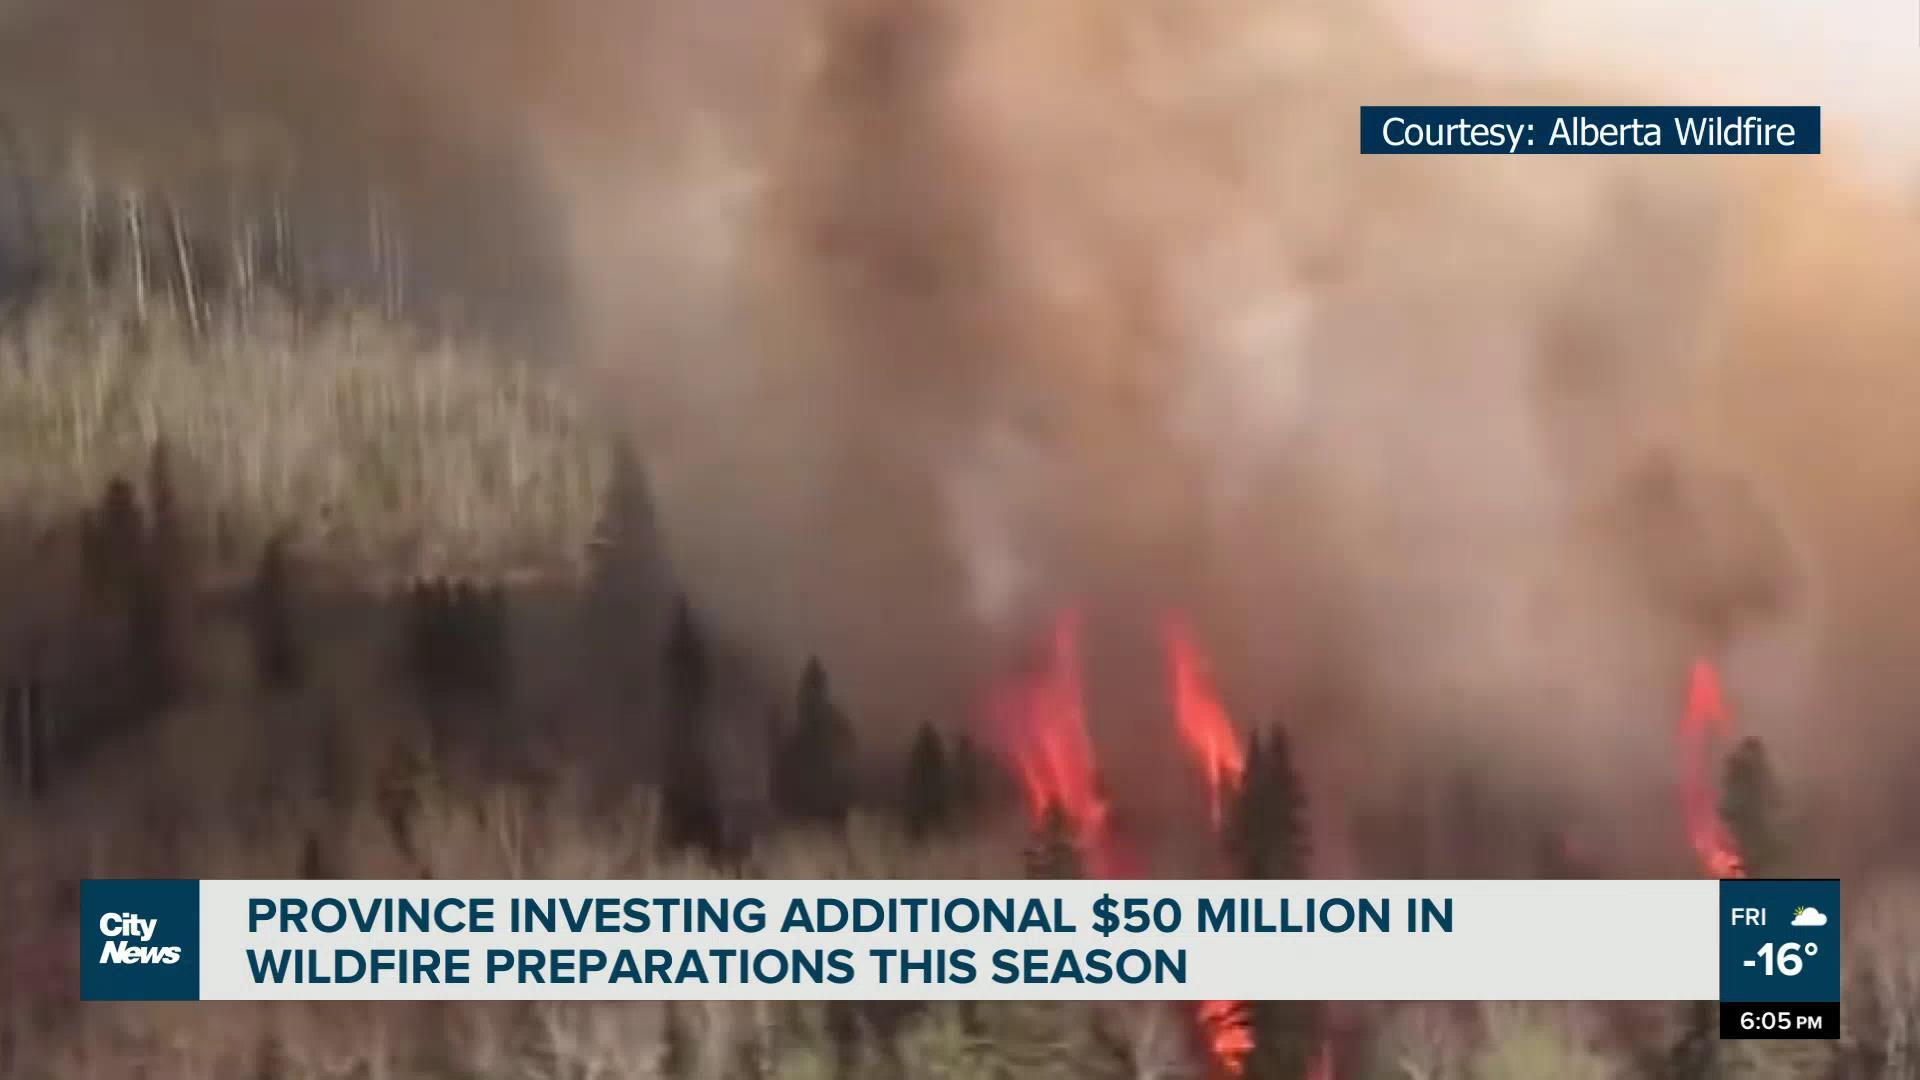 Province investing $150 million to wildfire preparations